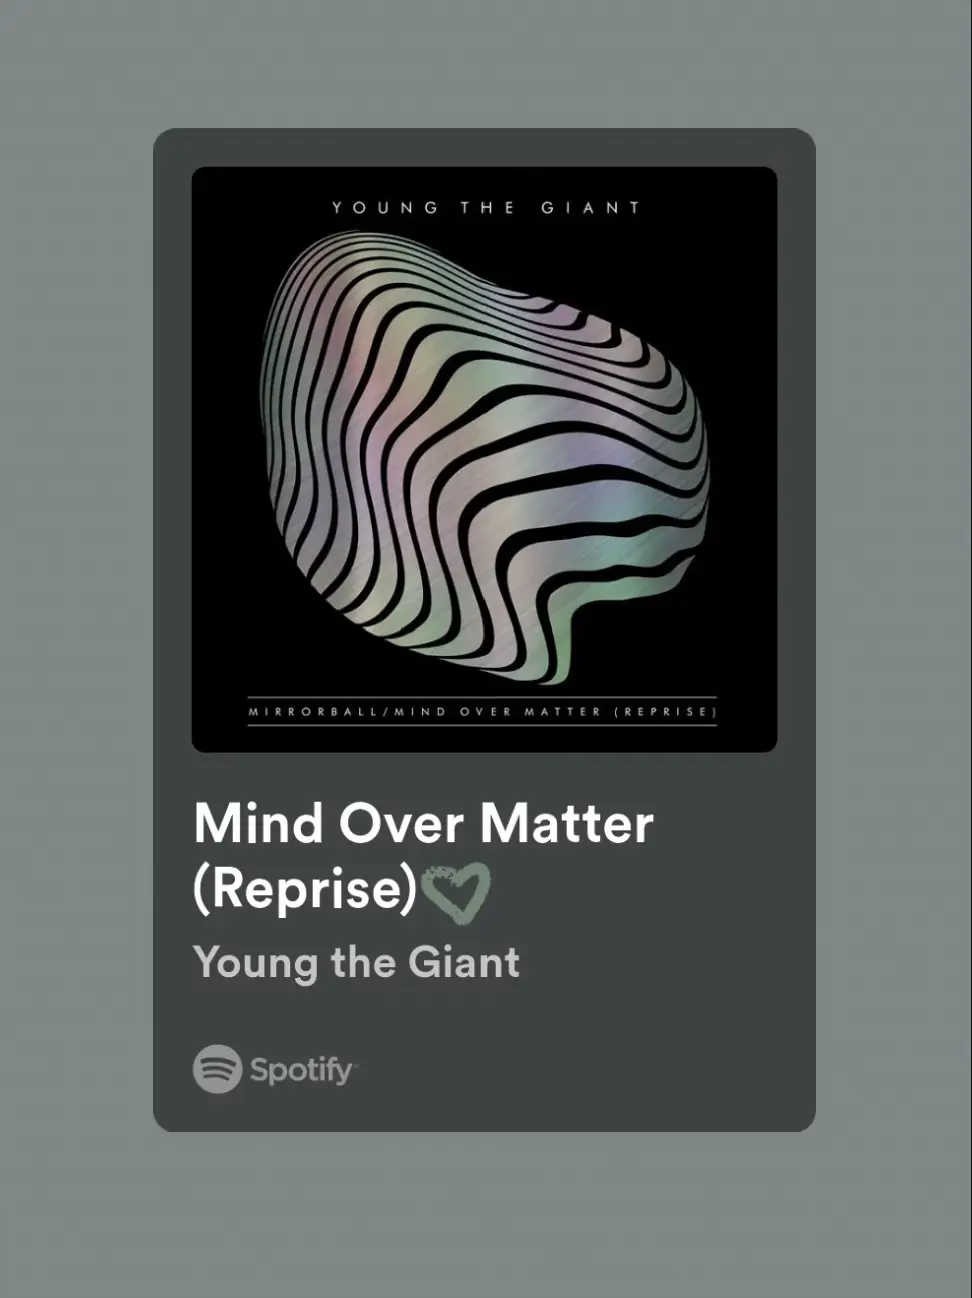  A Spotify ad for a song called "Mind Over Matter" by Young the Giant.